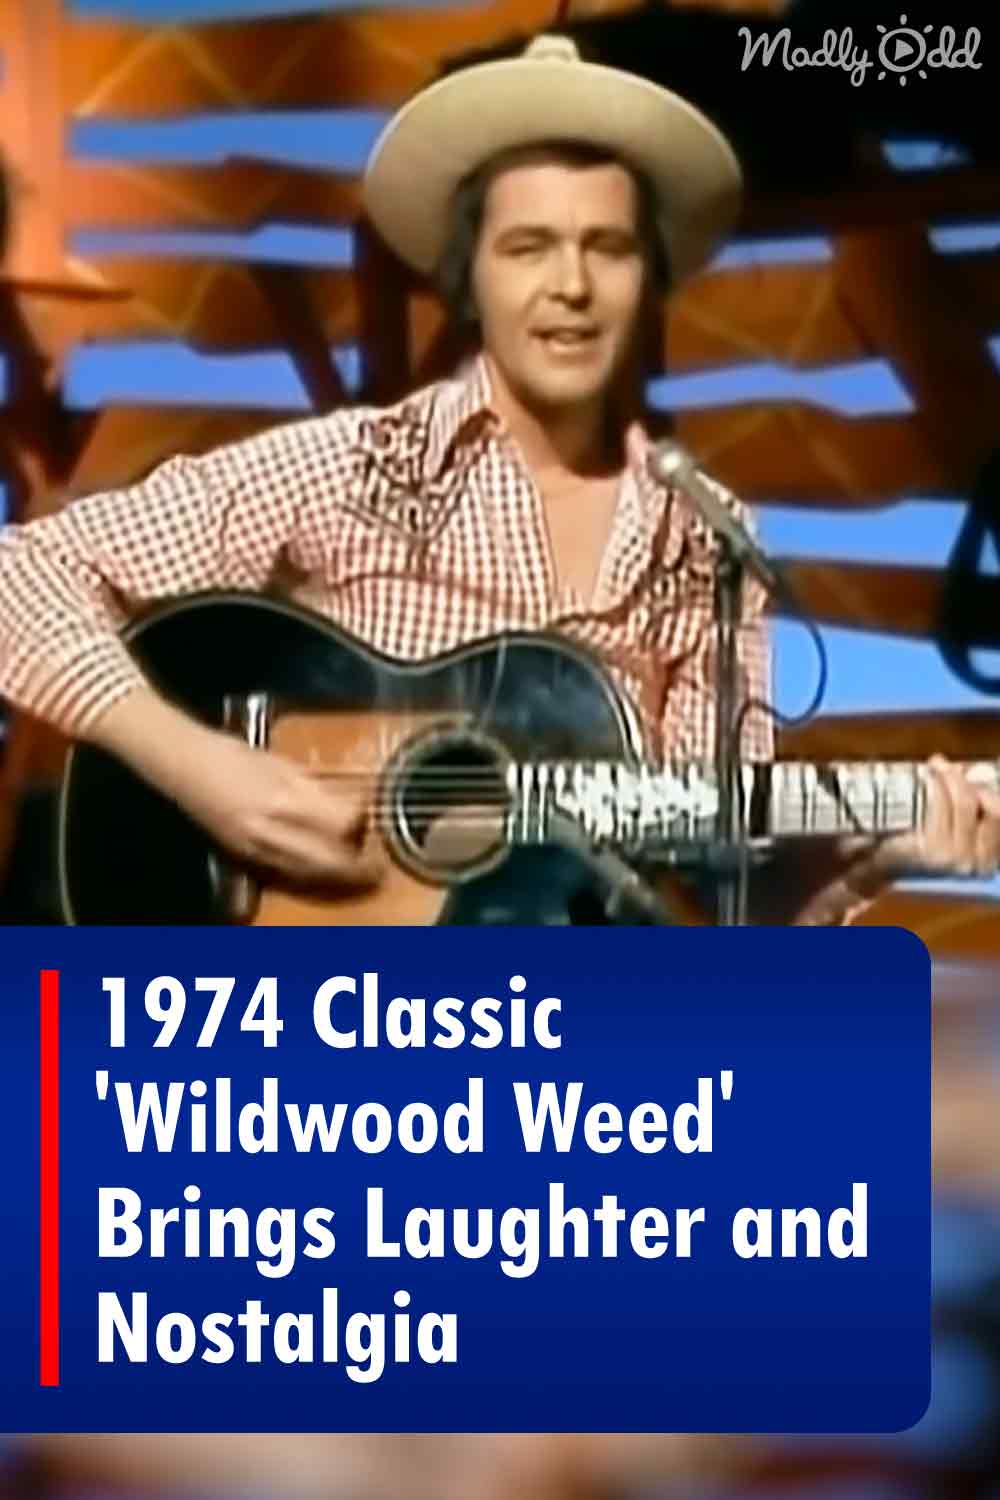 1974 Classic \'Wildwood Weed\' Brings Laughter and Nostalgia